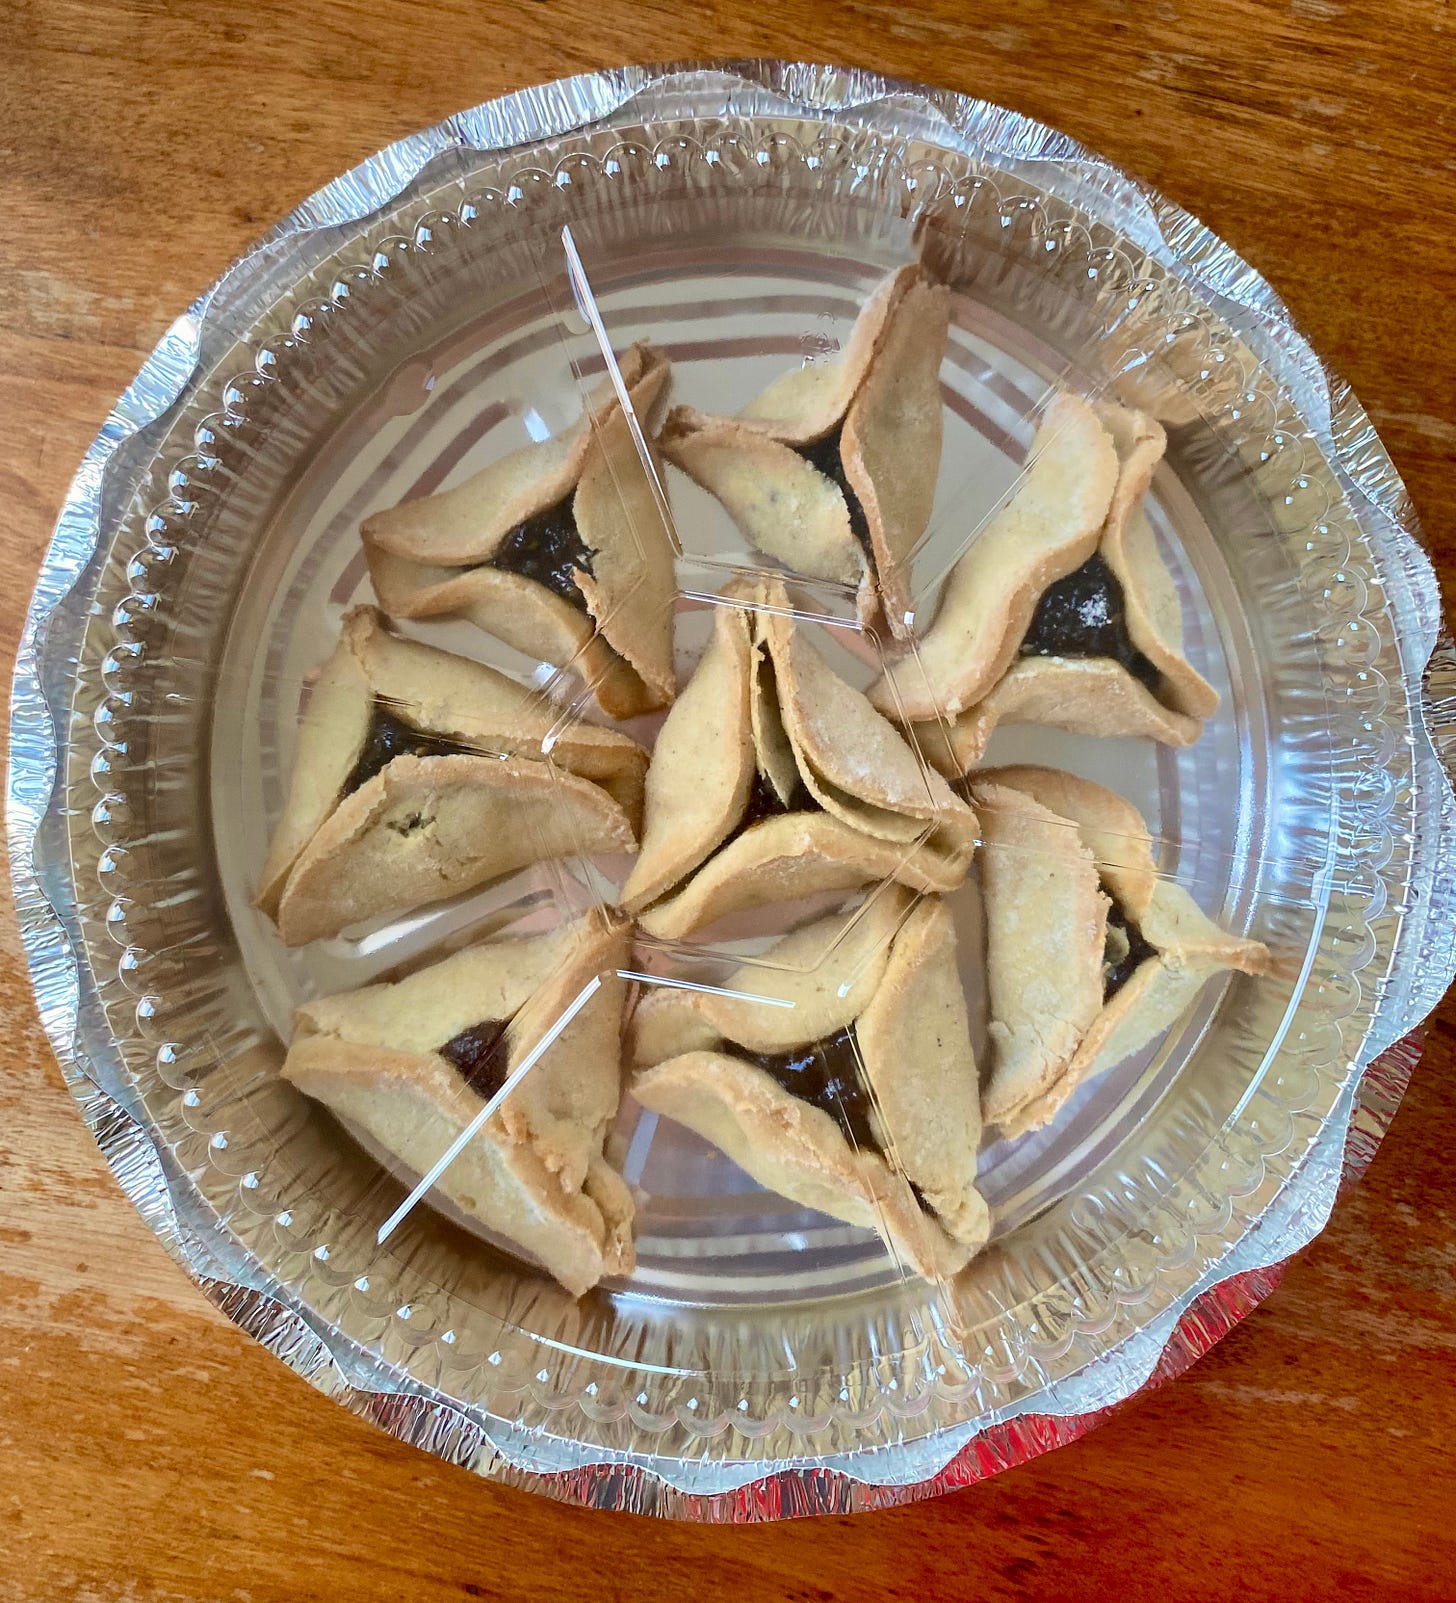 A metal takeout tray filled with hamantaschen